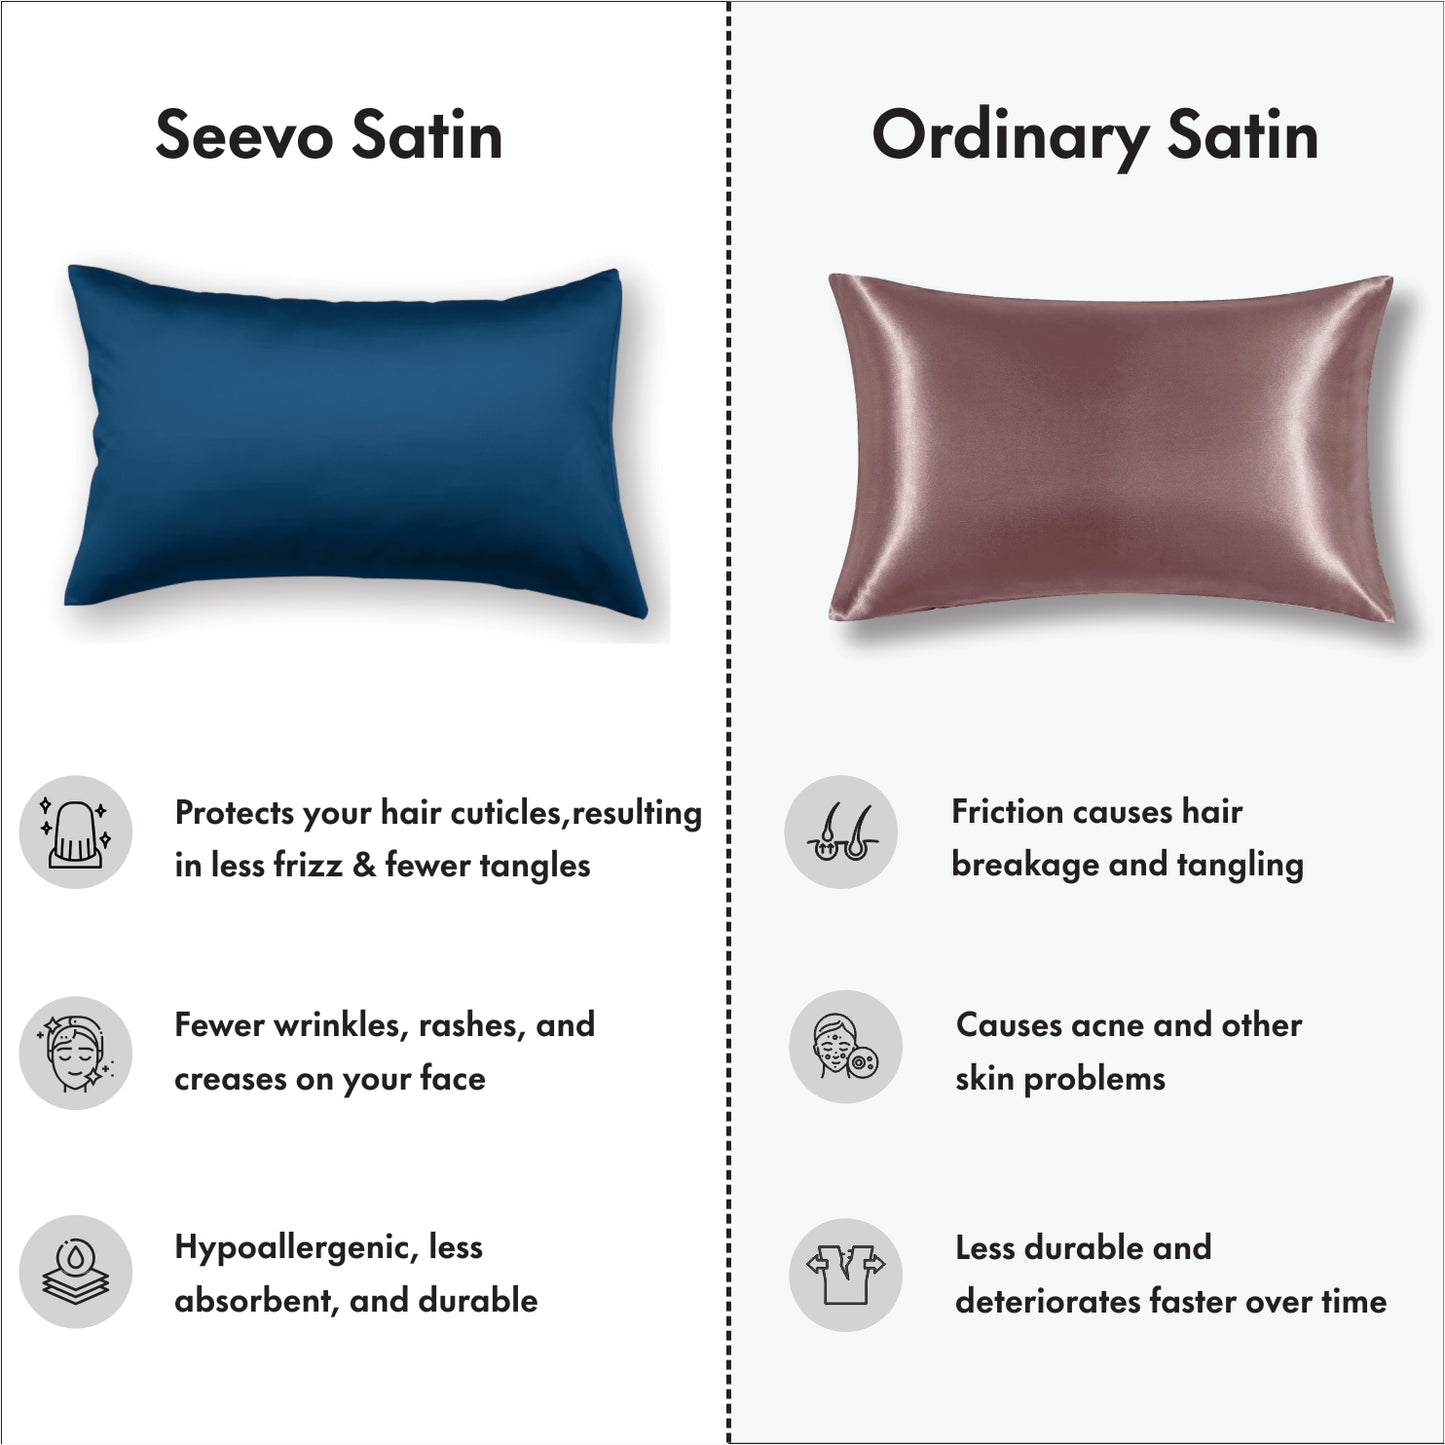 Sky Blue Satin Pillowcases - Set of 2 (With 3 Free Scrunchies)